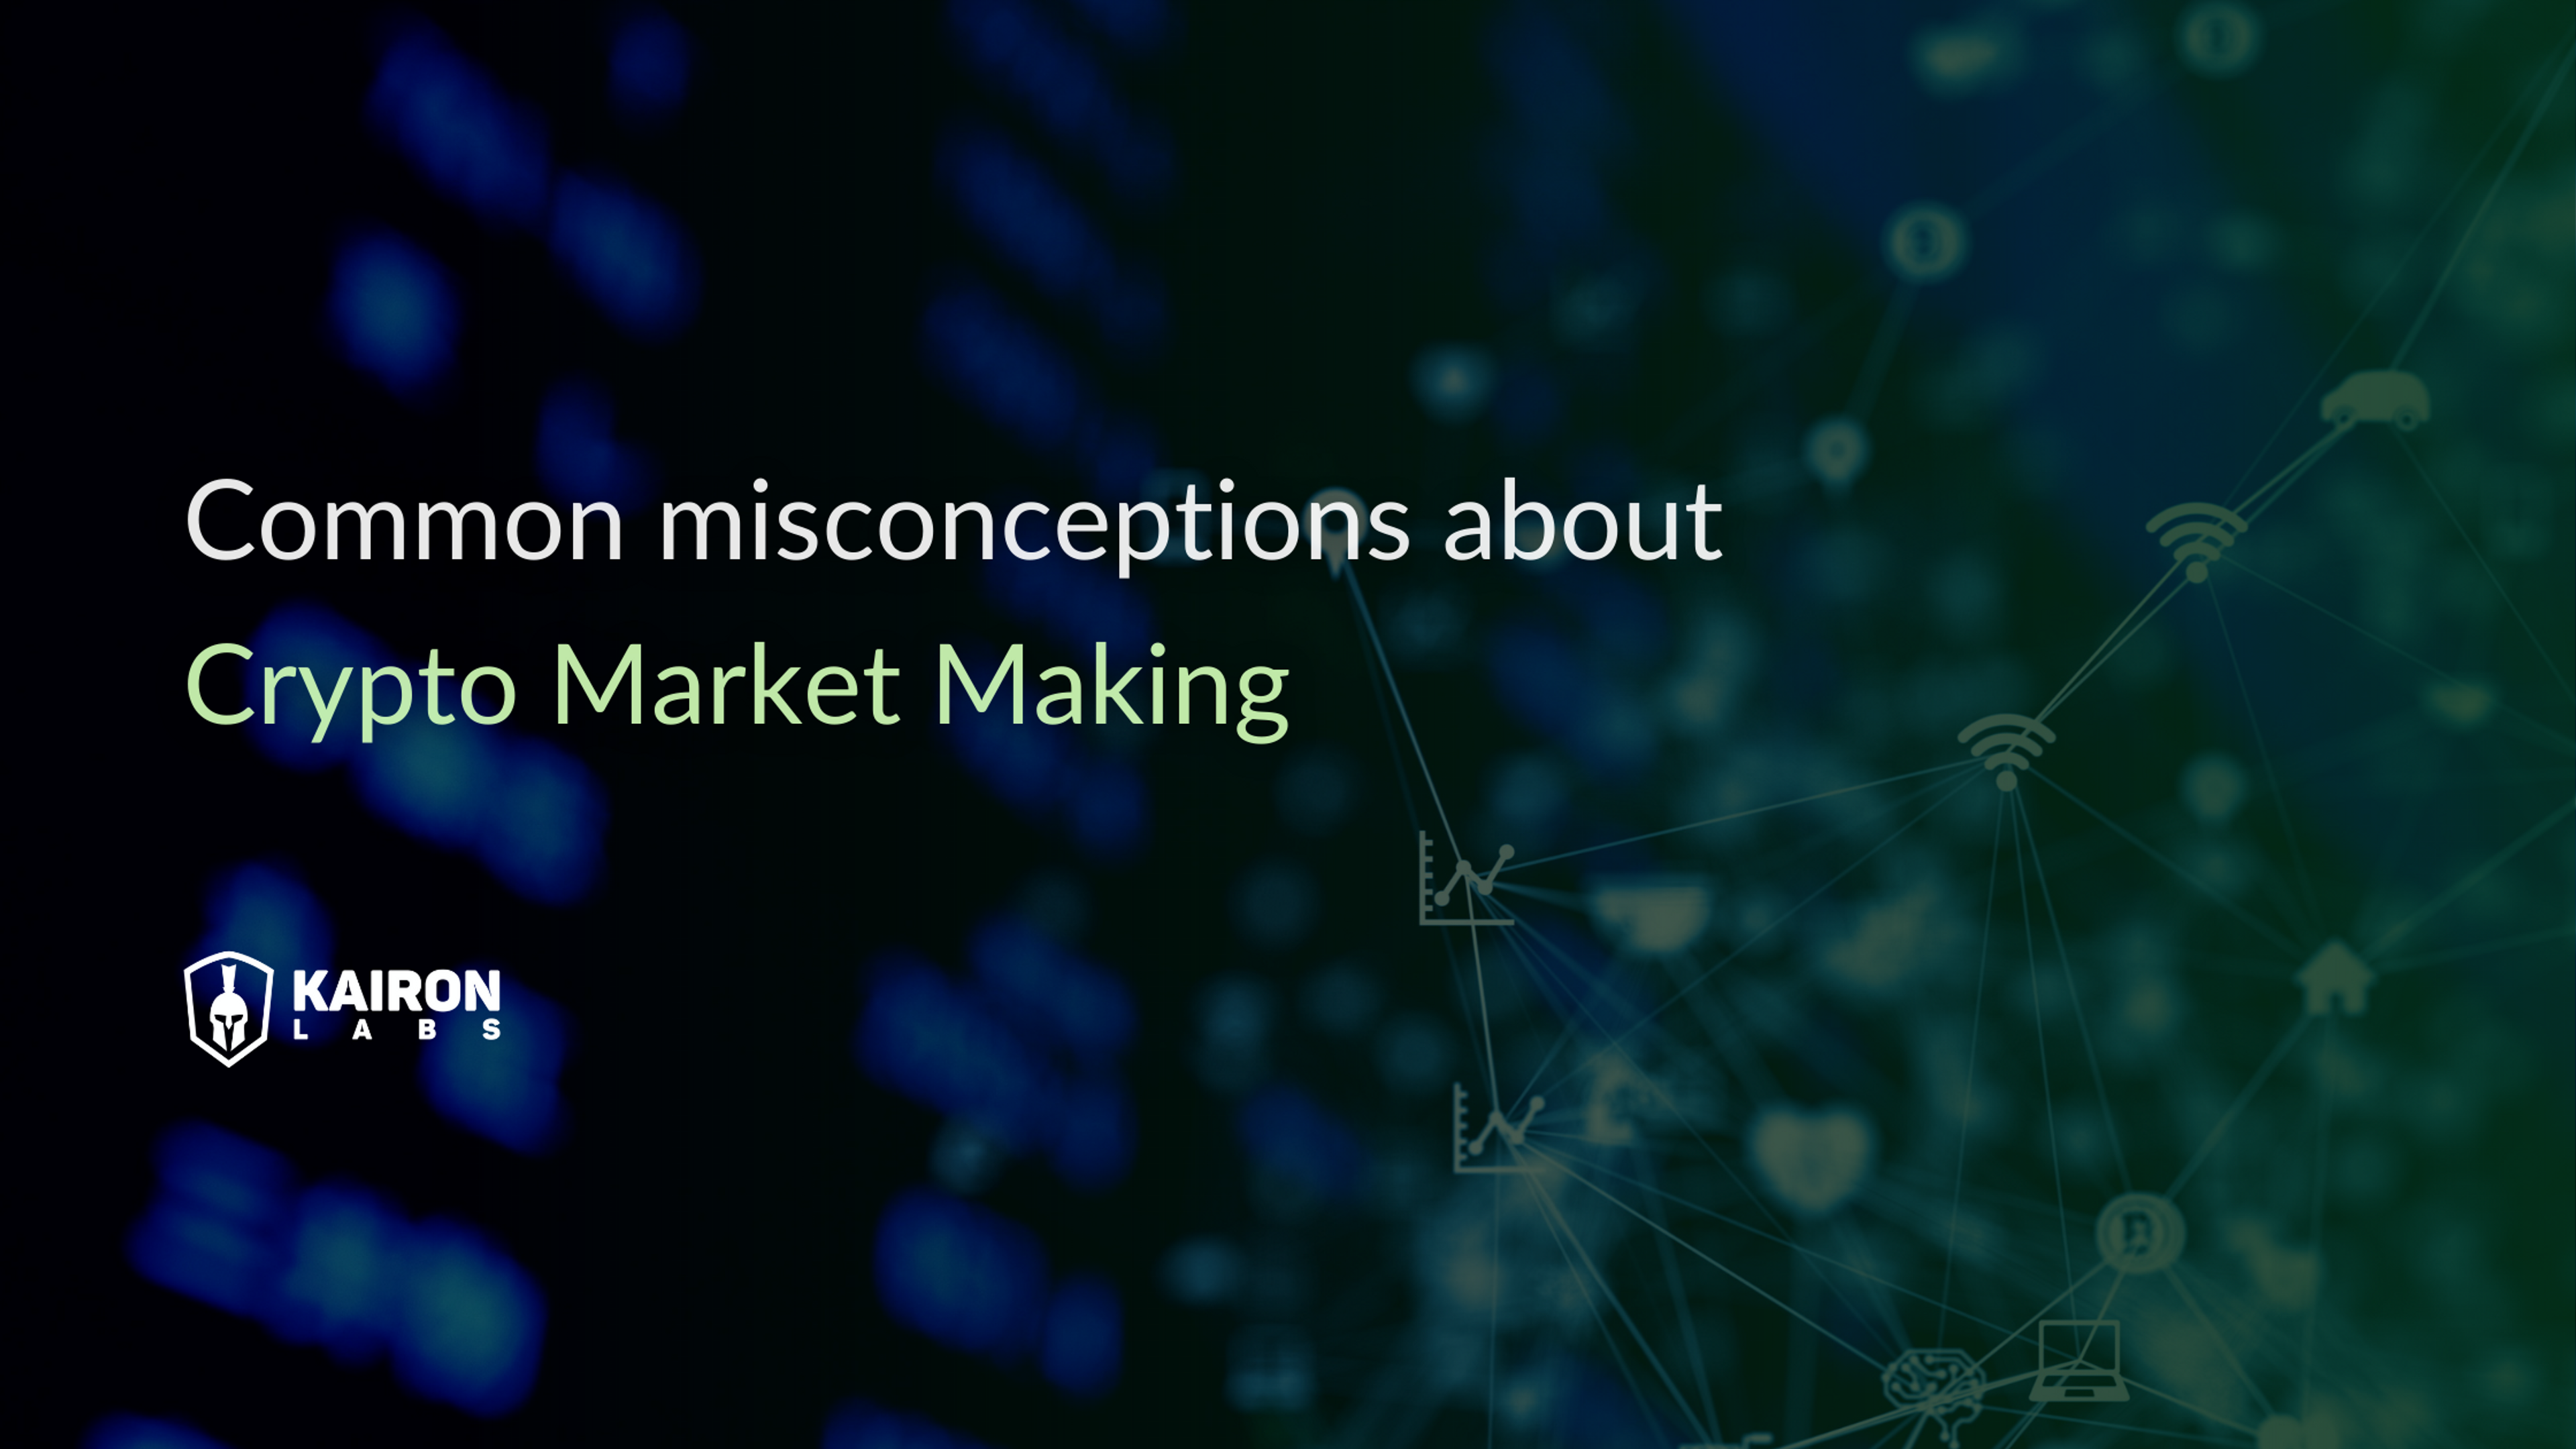 Common misconceptions about Crypto Market Making